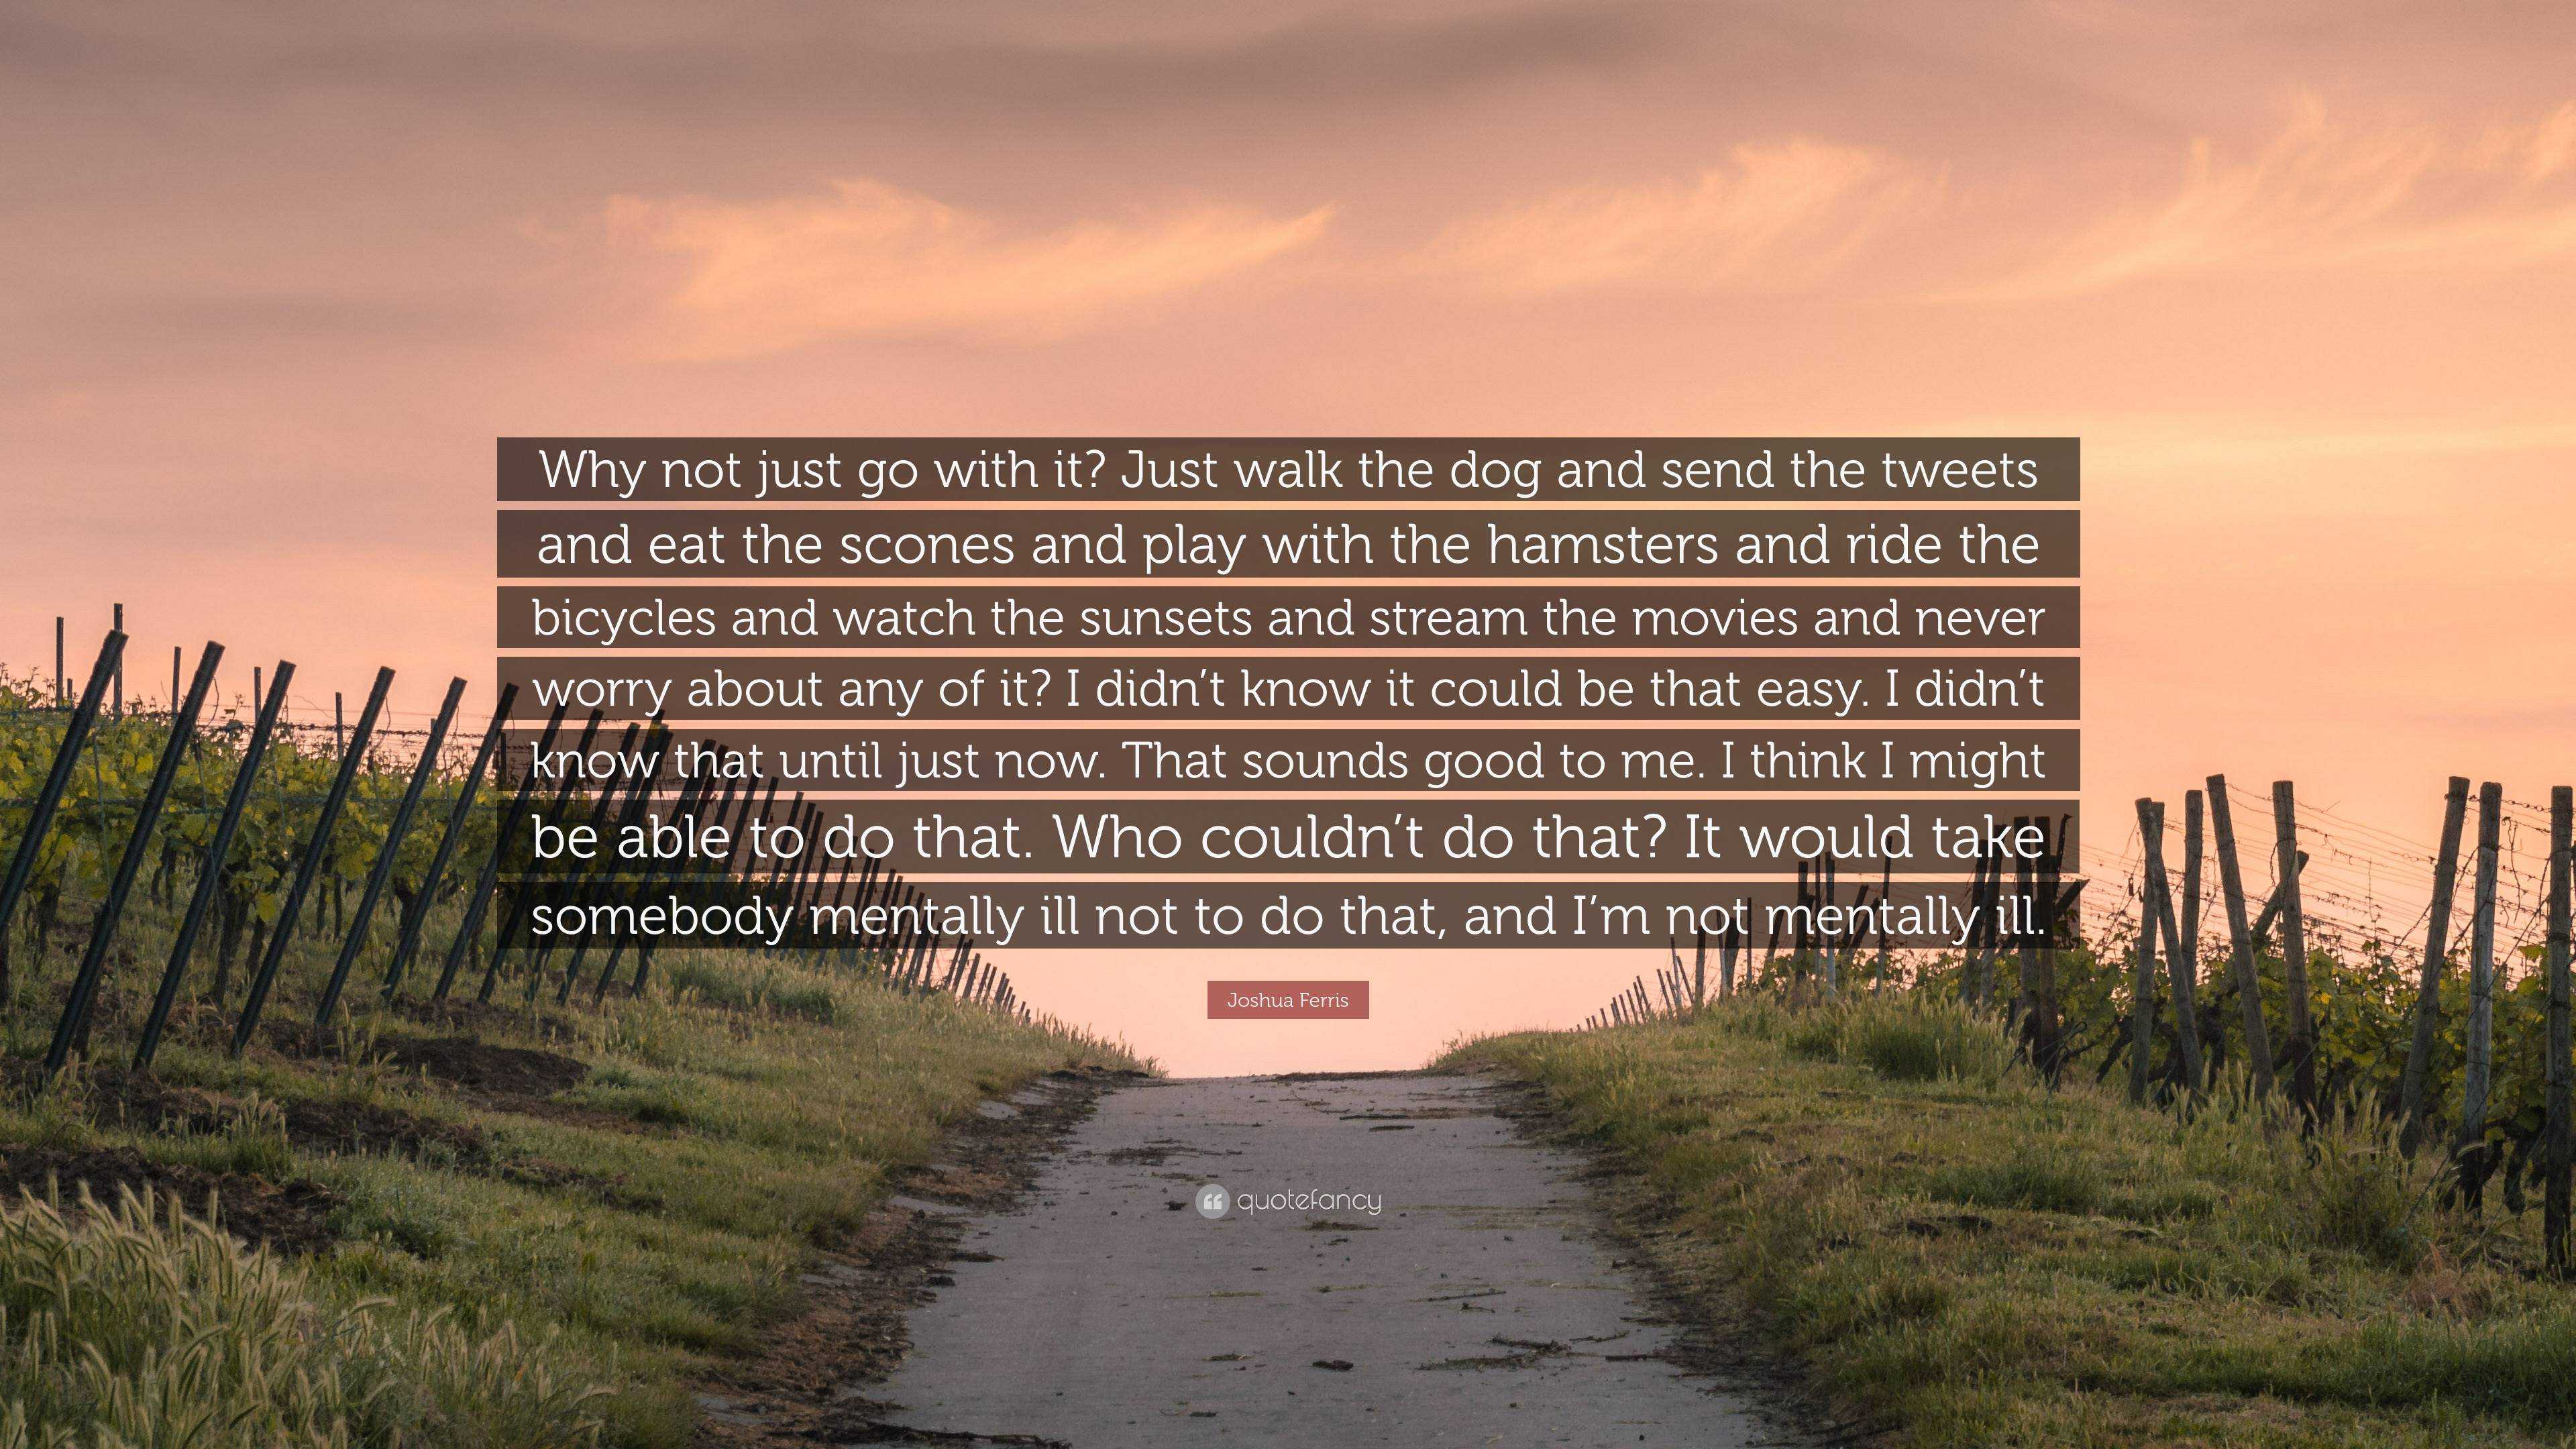 https://quotefancy.com/media/wallpaper/3840x2160/6793061-Joshua-Ferris-Quote-Why-not-just-go-with-it-Just-walk-the-dog-and.jpg